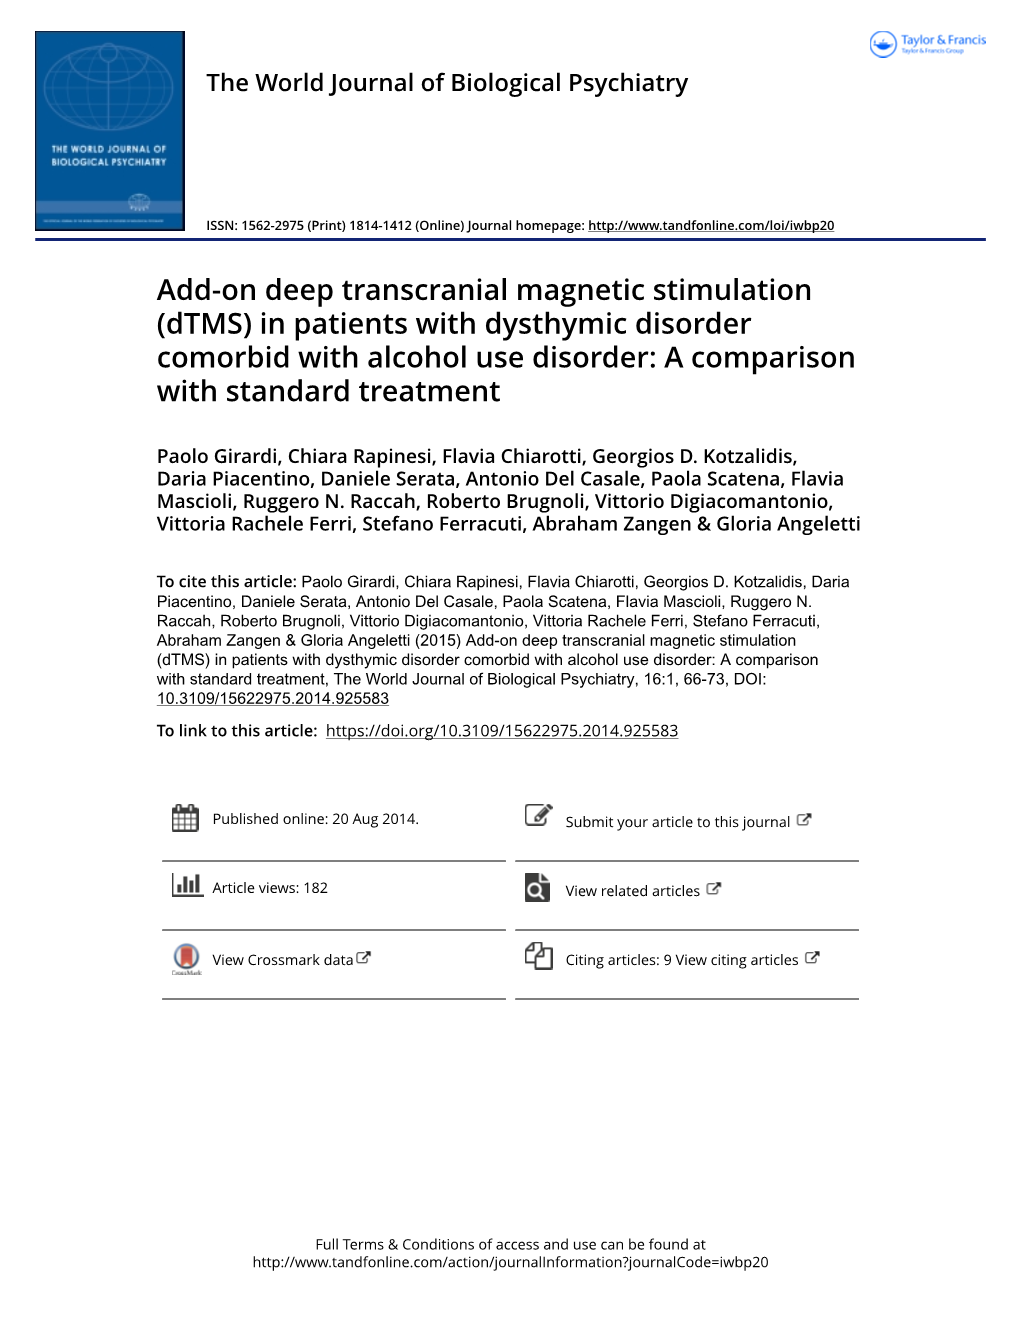 Add-On Deep Transcranial Magnetic Stimulation (Dtms) in Patients with Dysthymic Disorder Comorbid with Alcohol Use Disorder: a Comparison with Standard Treatment